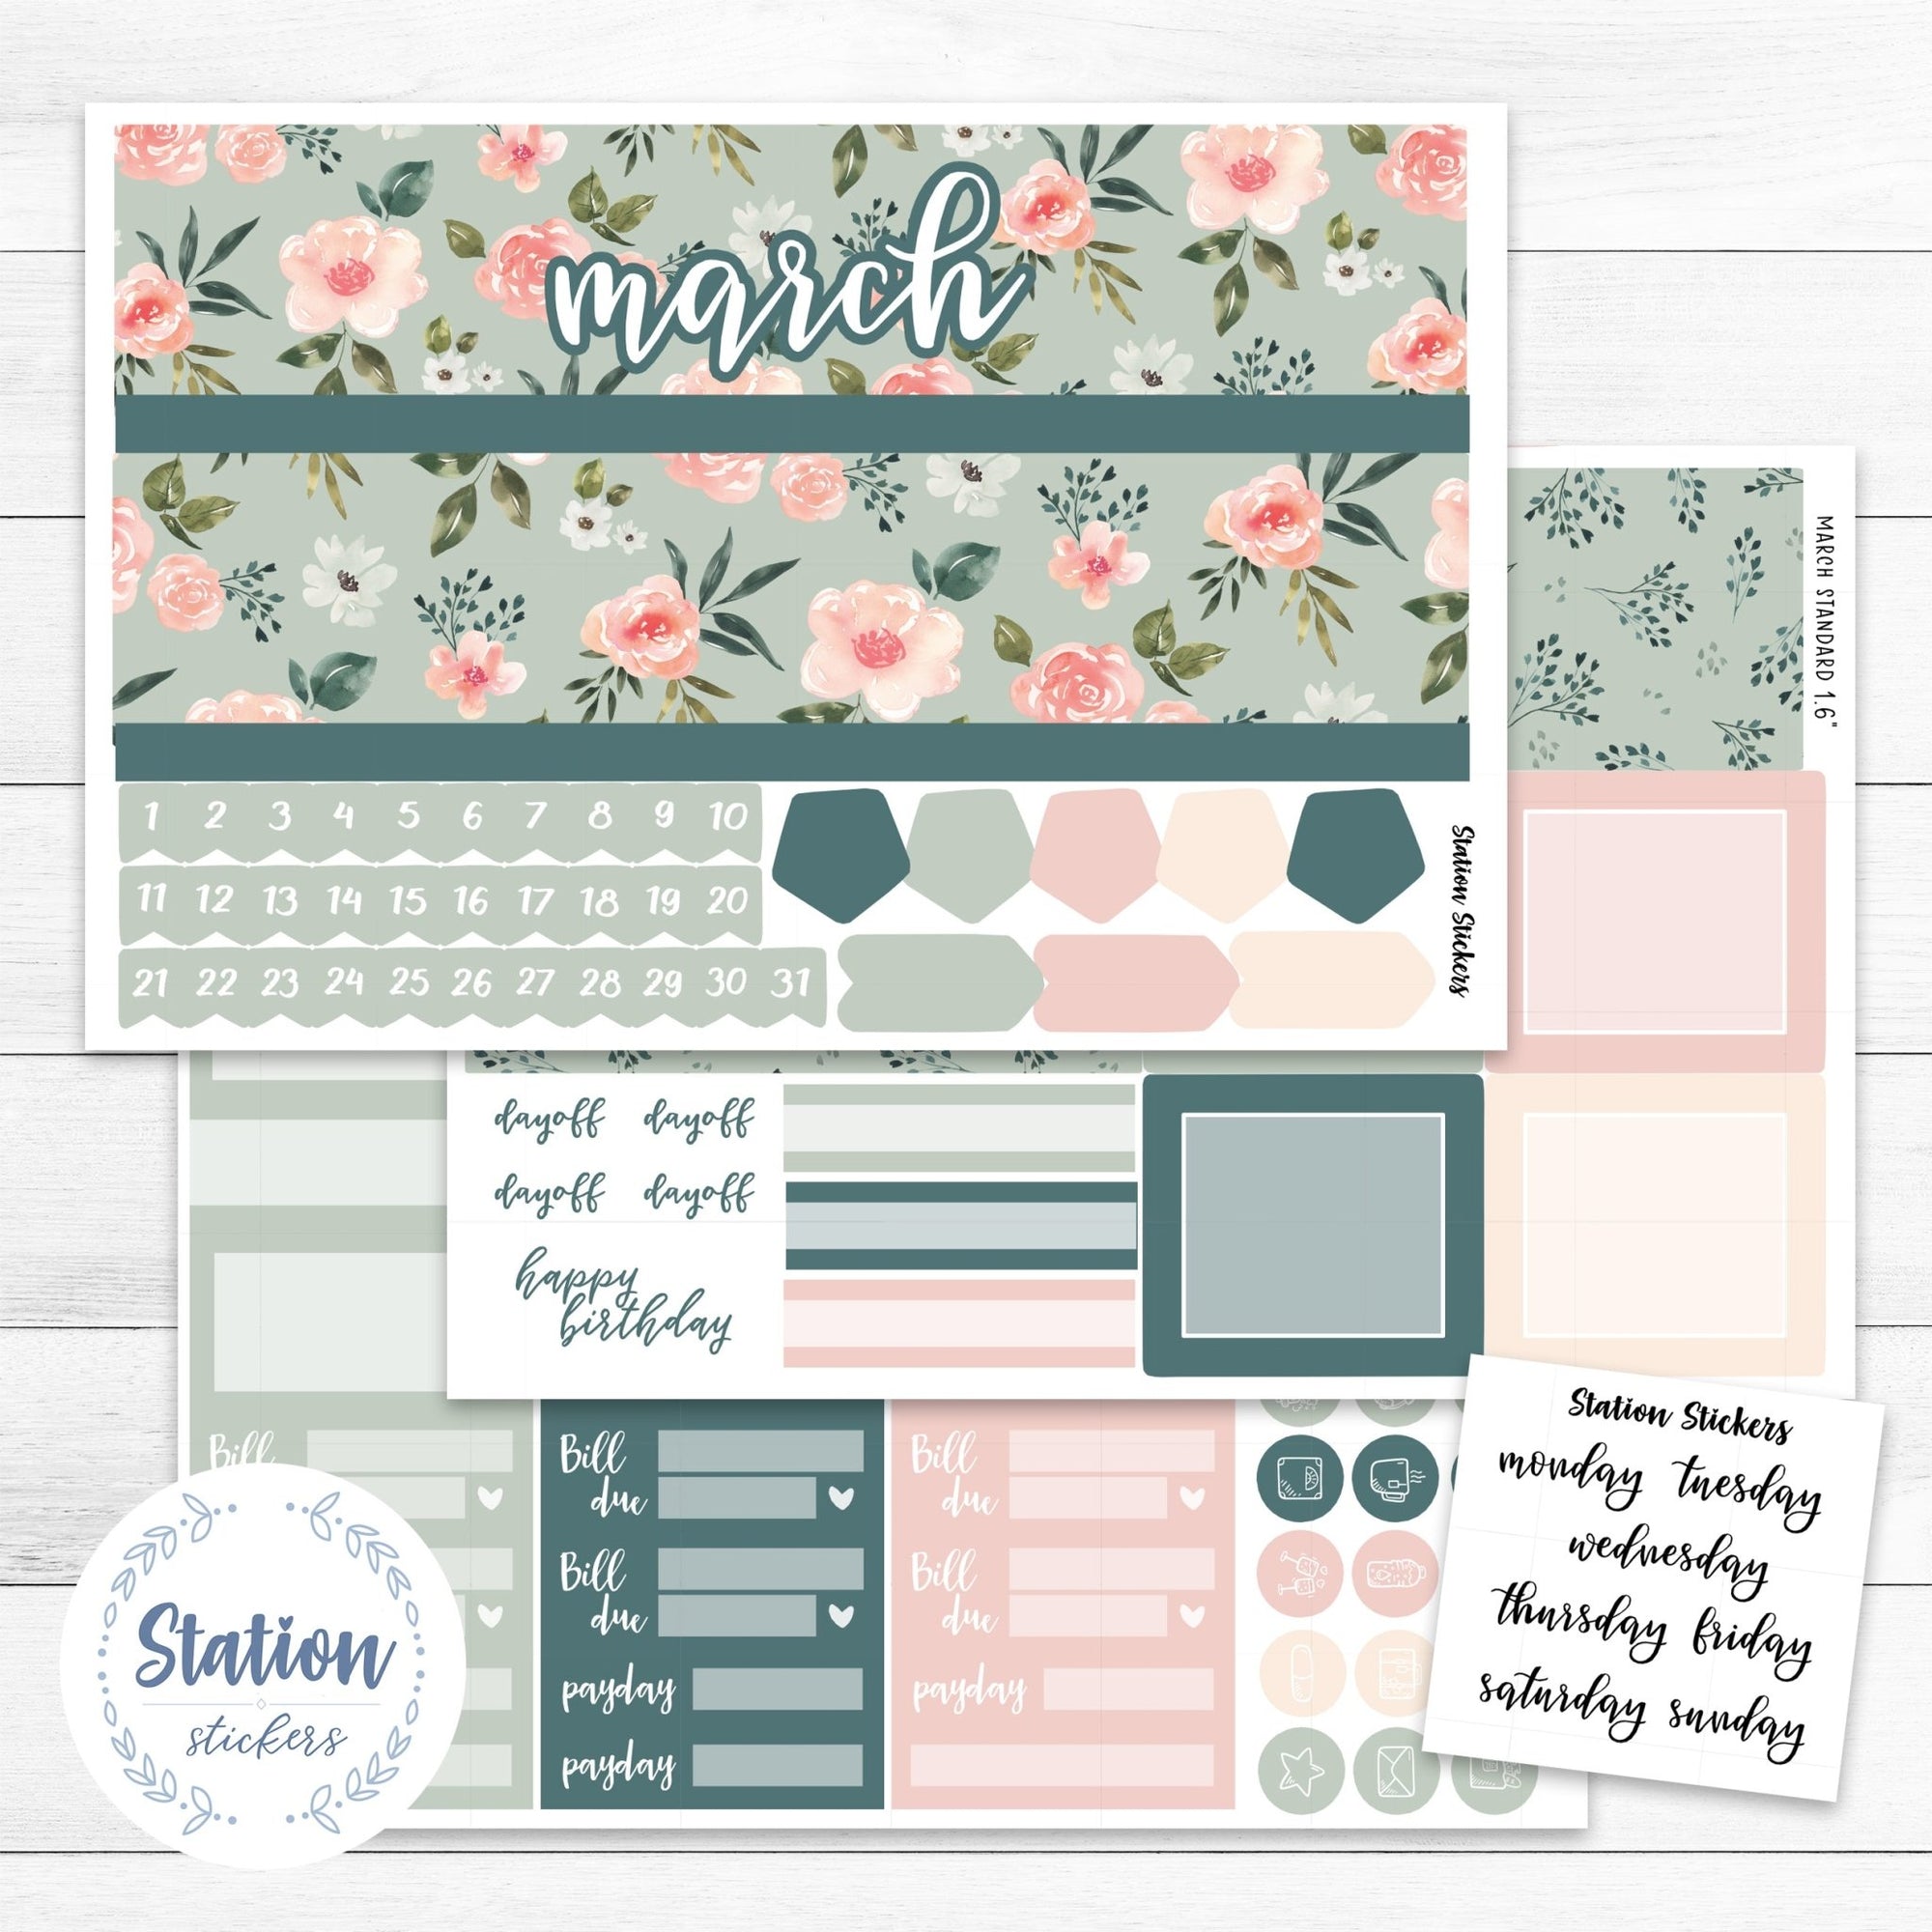 MONTHLY EC 7X9 DAILY DUO • MARCH - Station Stickers